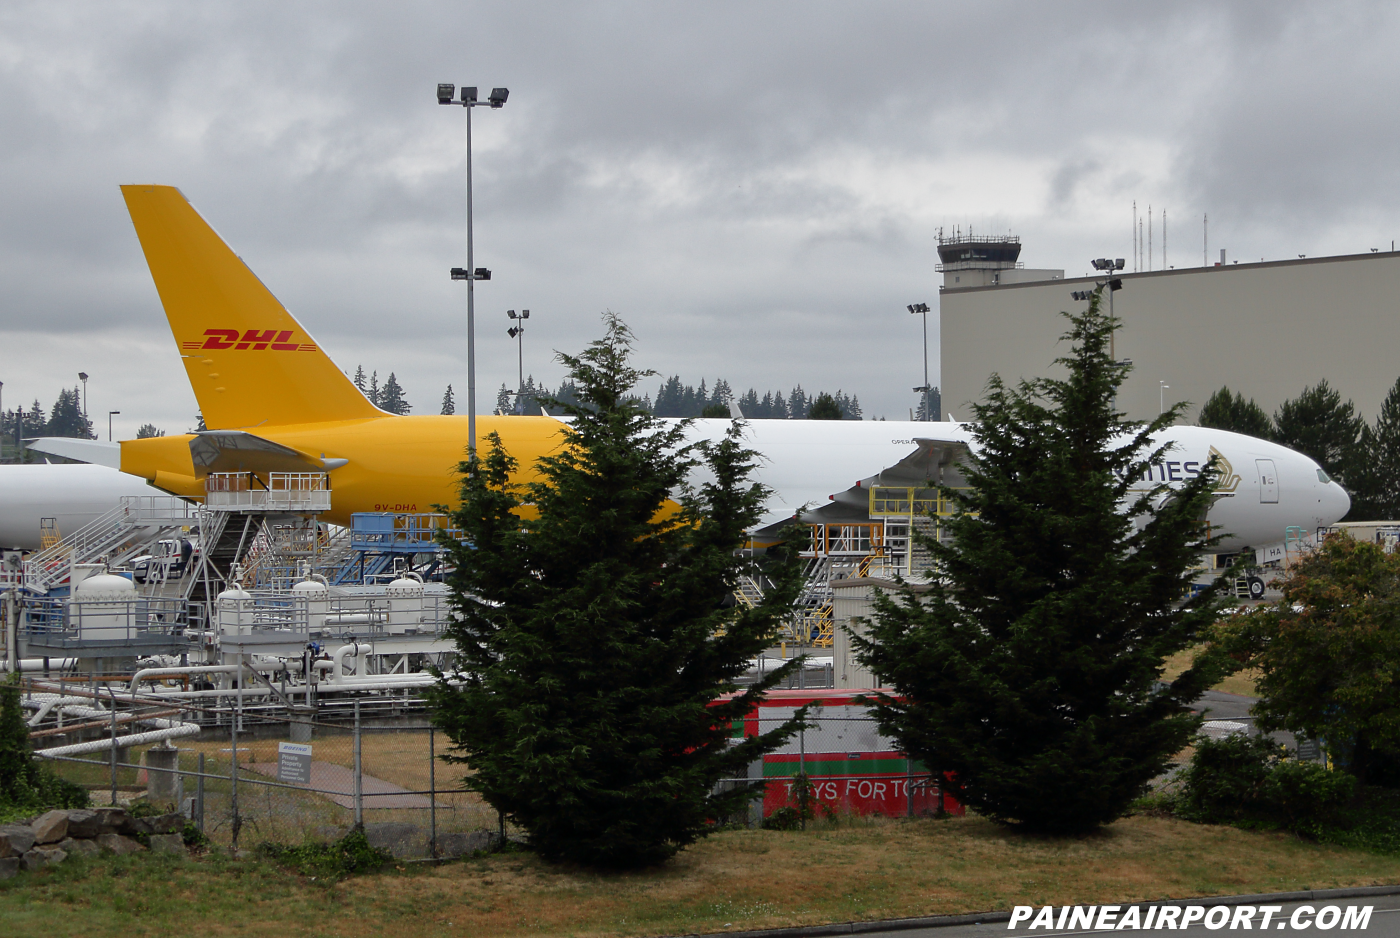 DHL 777F 9V-DHA at KPAE Paine Field